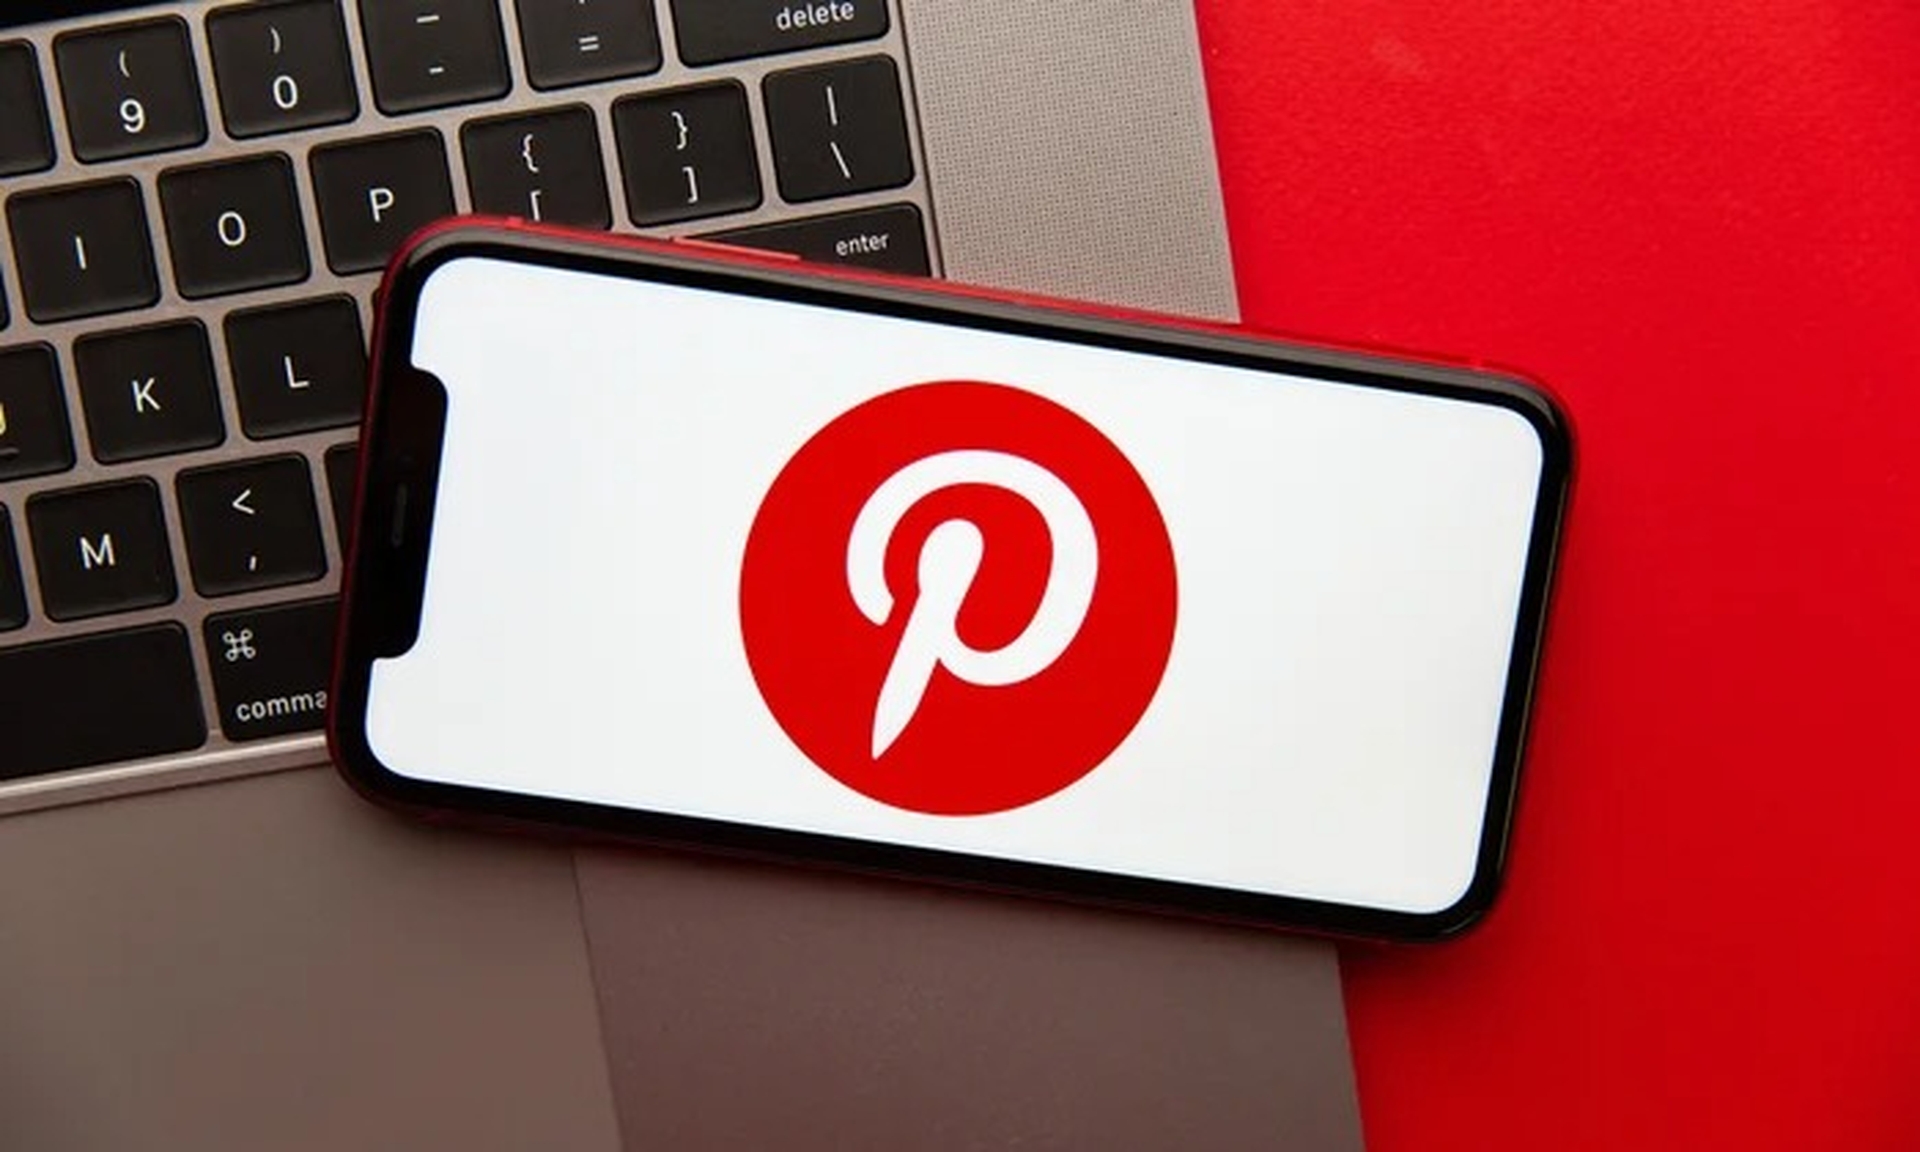 In this article, we are going to cover how to rank on Pinterest in 2022, so your pins can get more attraction and you may grow your presence on the platform.